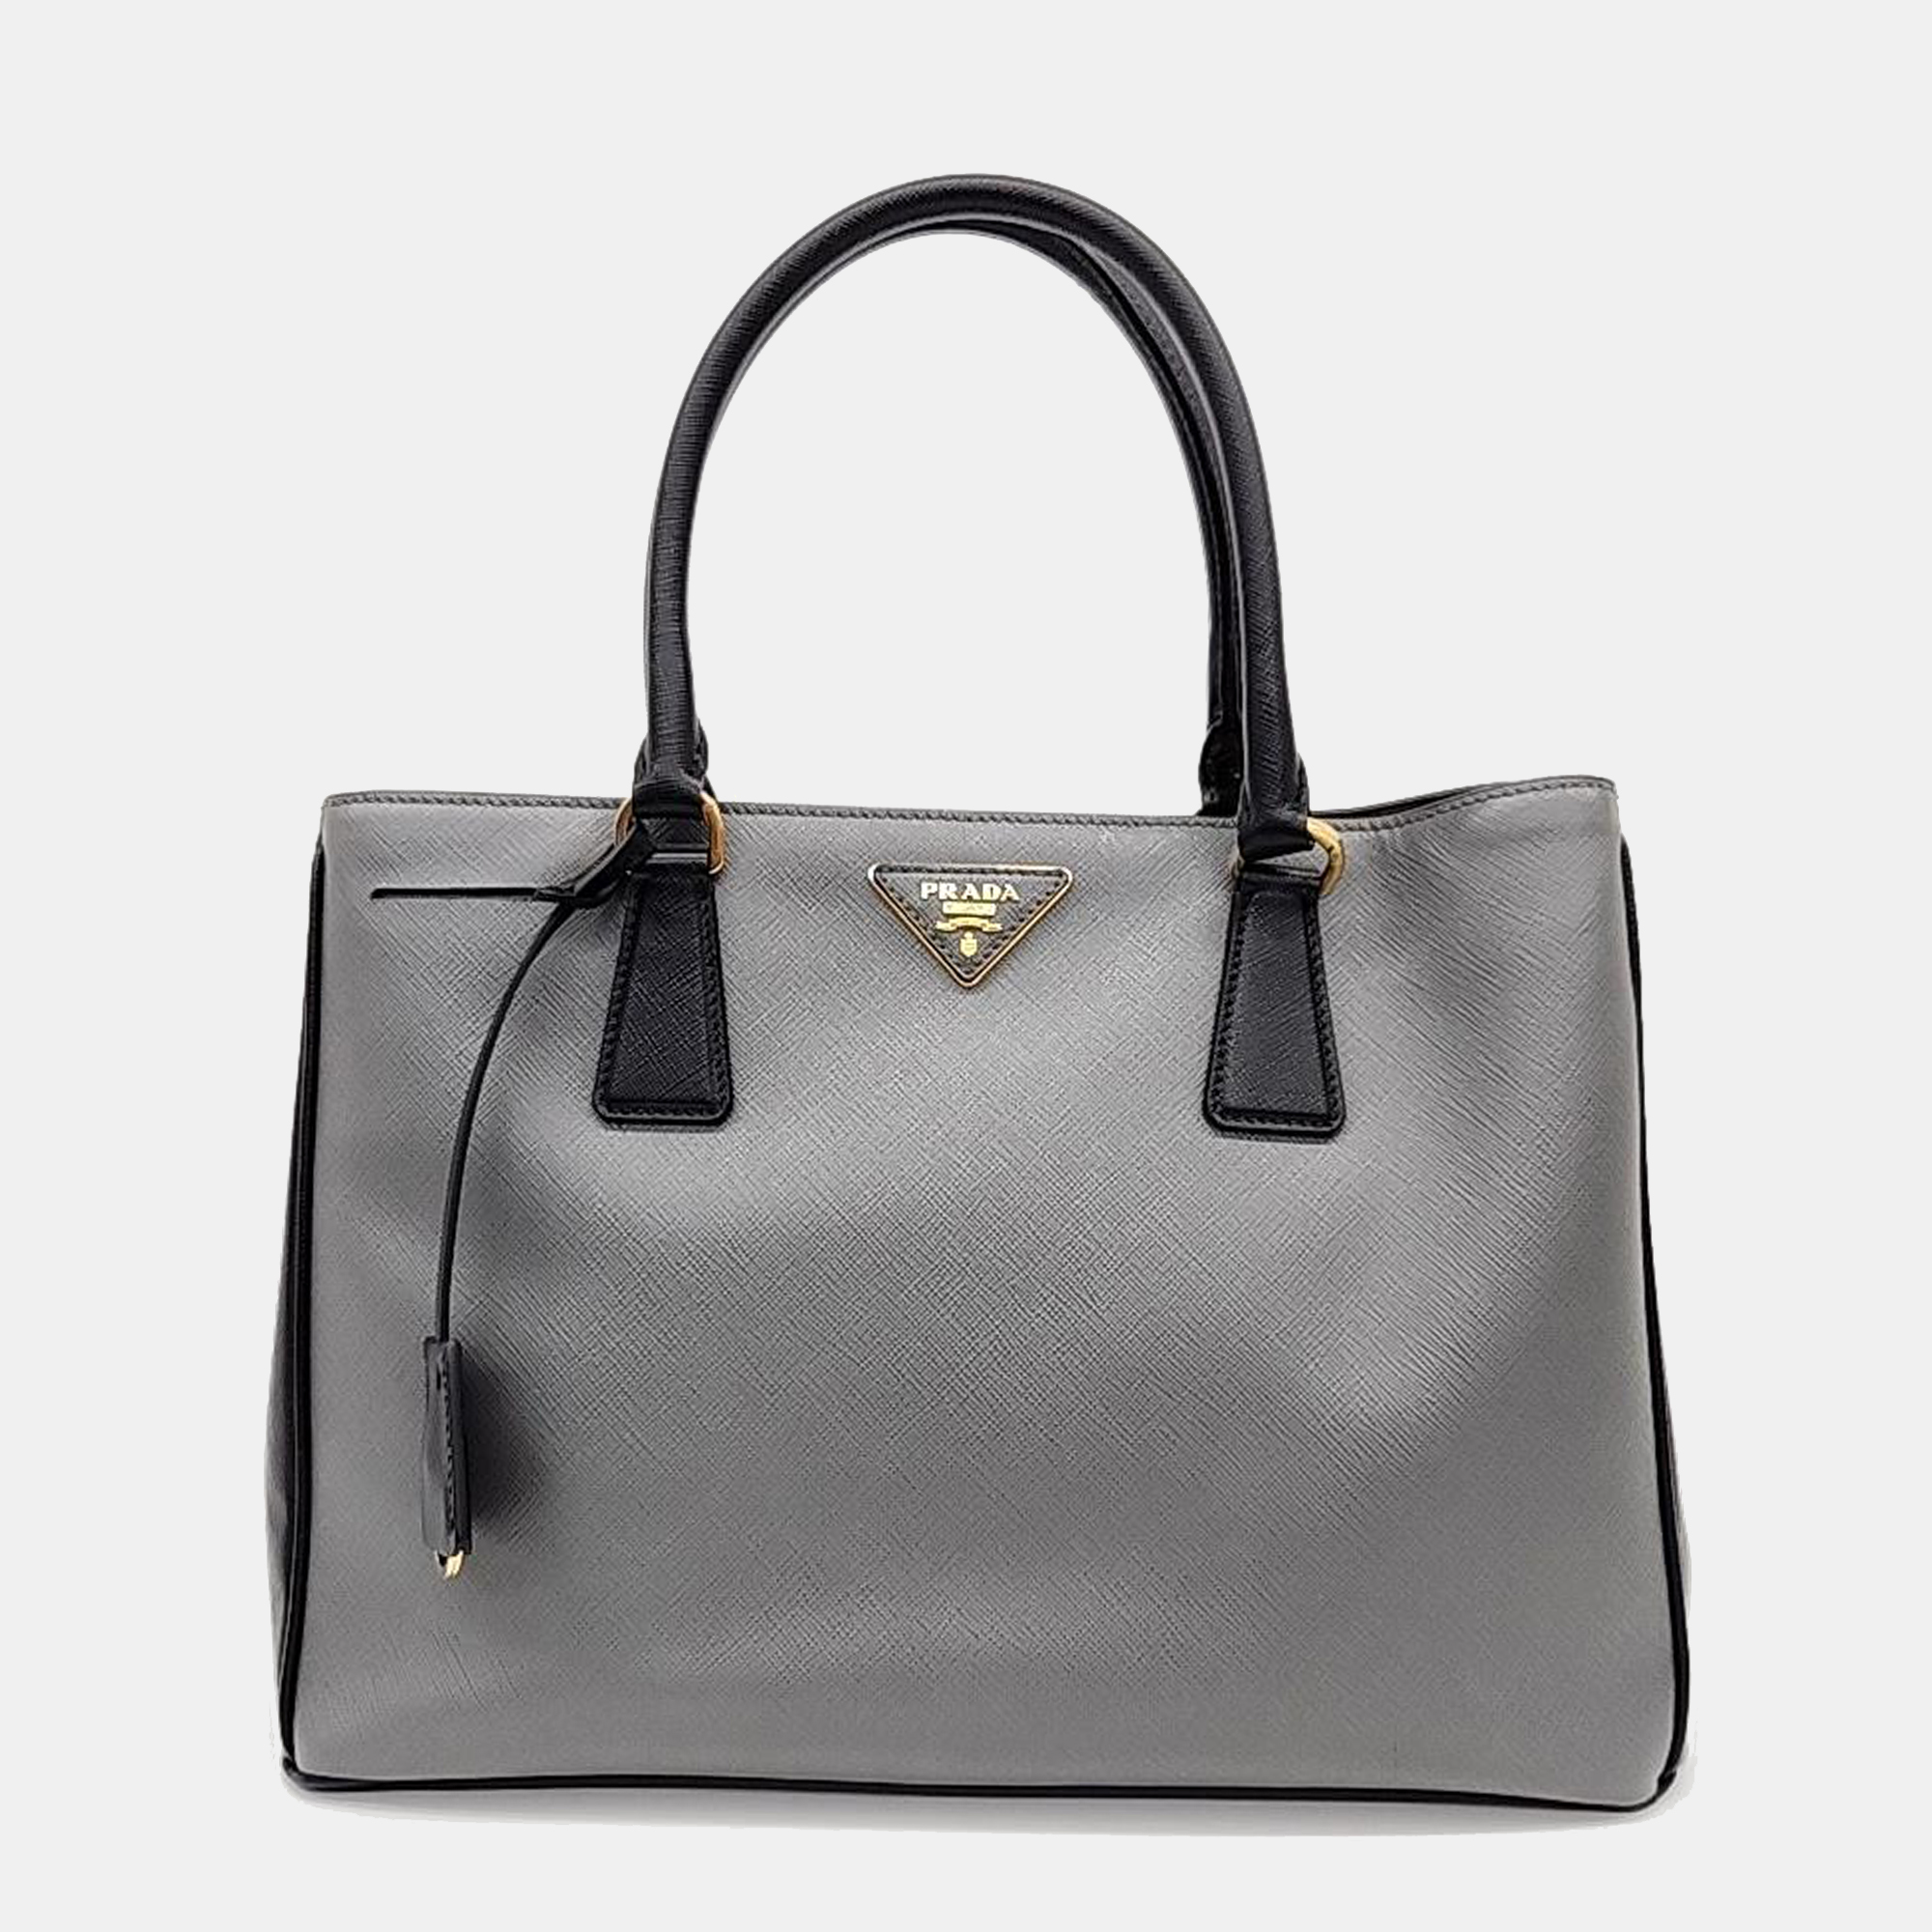 Crafted with precision this Prada bag combines luxurious materials with impeccable design ensuring you make a sophisticated statement wherever you go. Invest in it today.